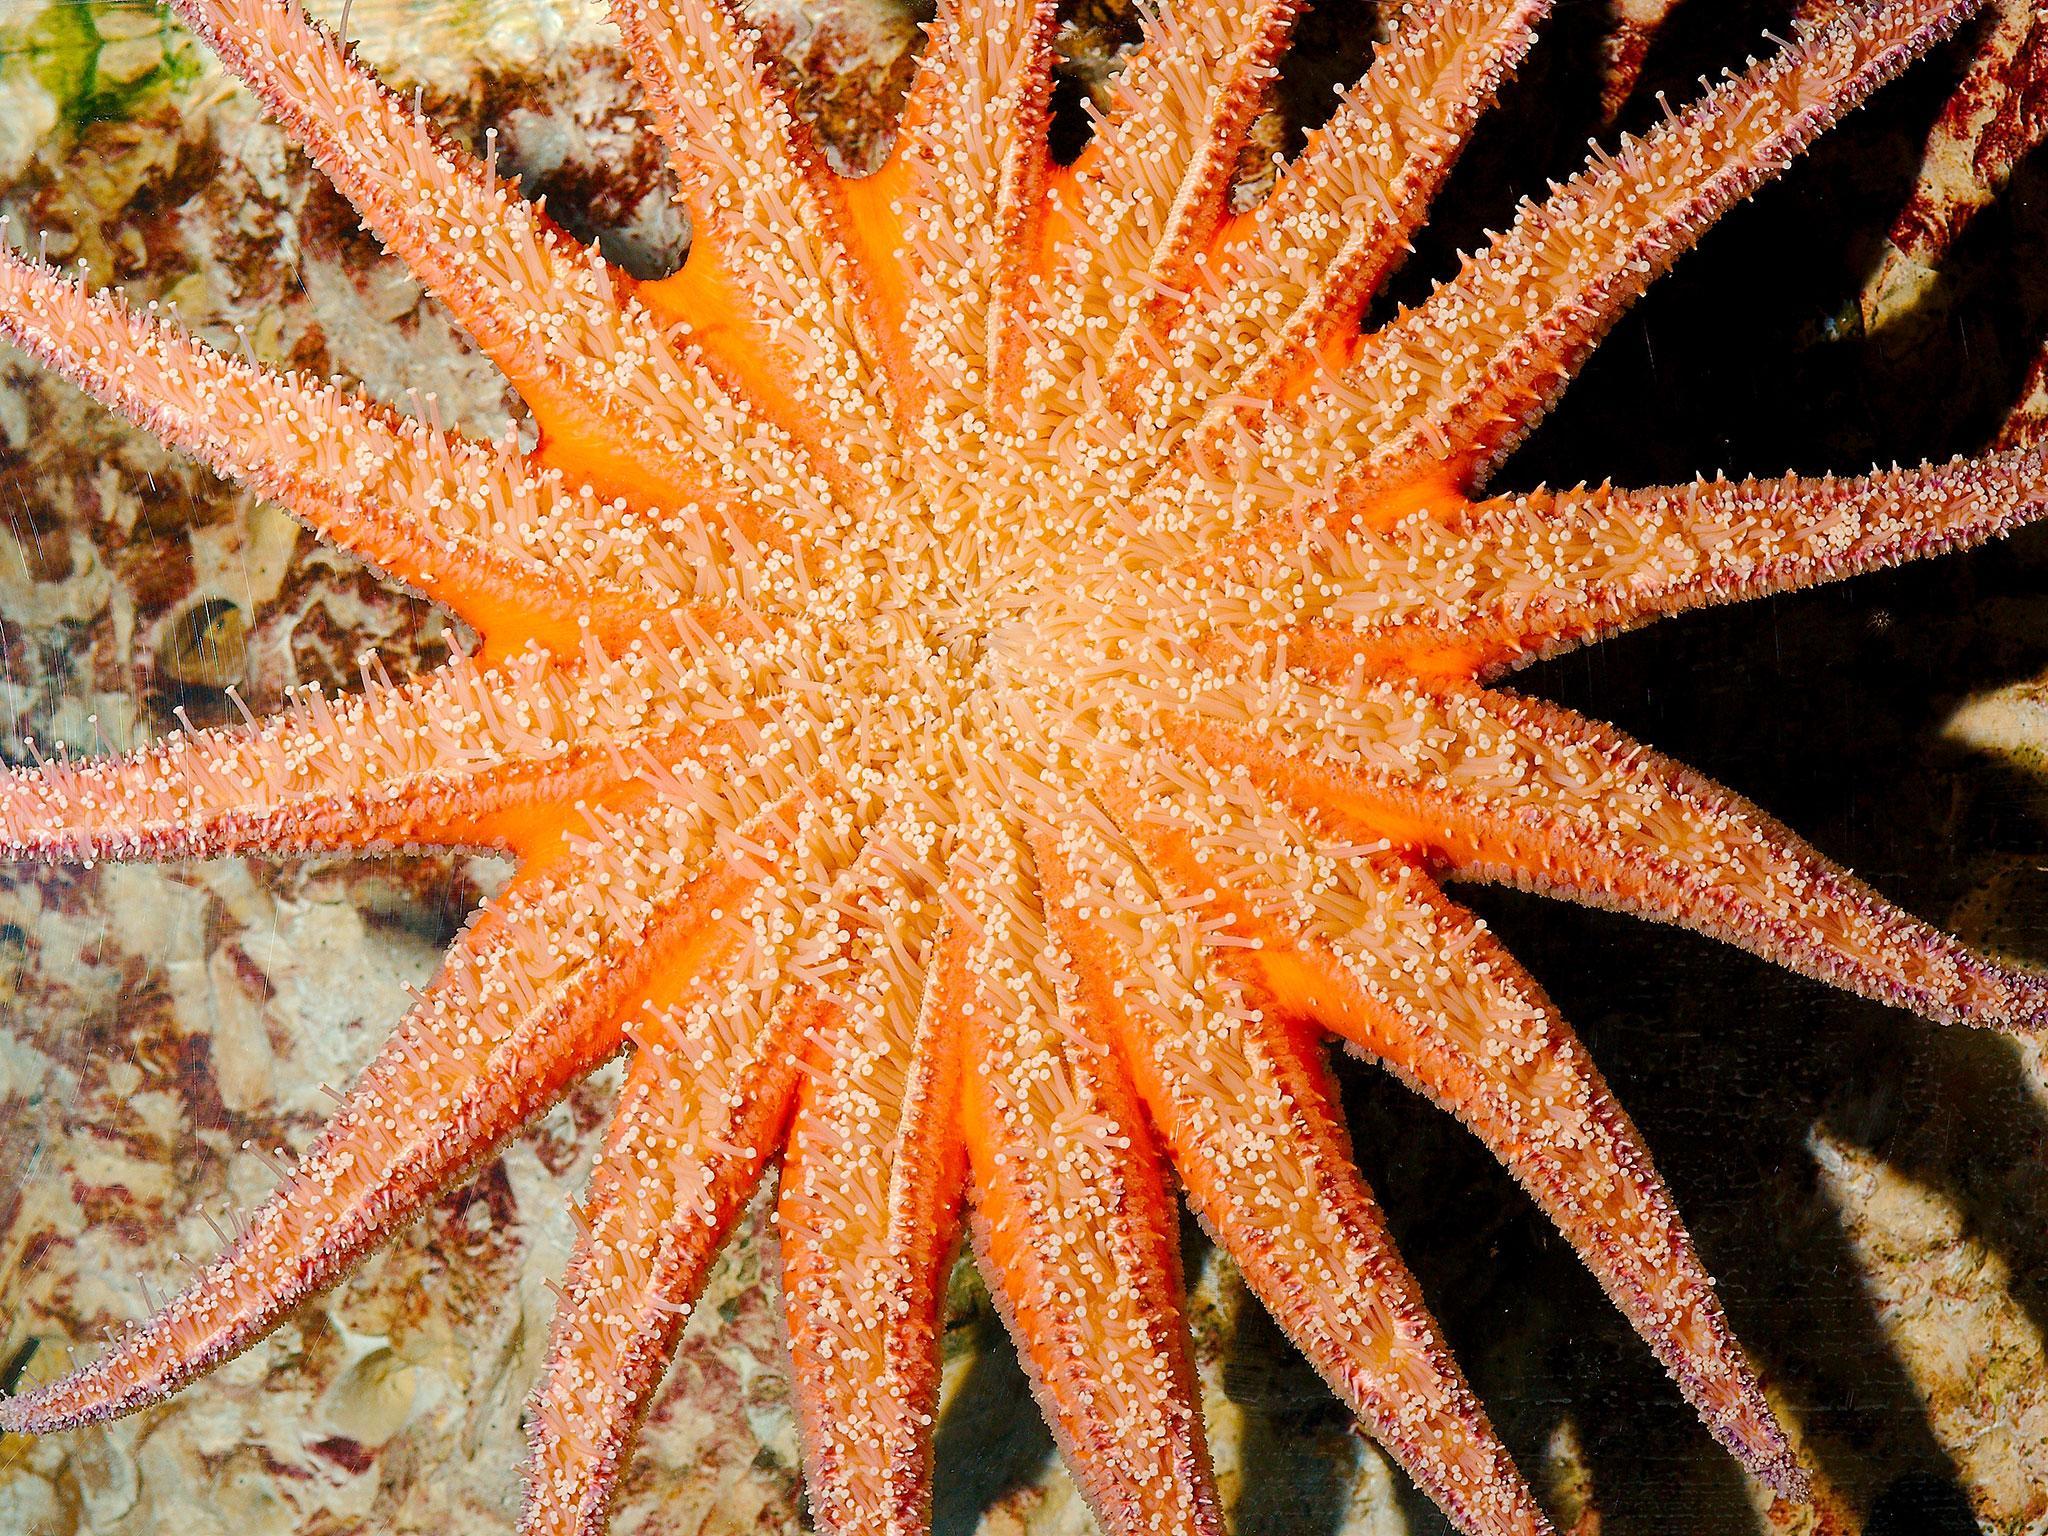 Starfish are dying out in the Pacific